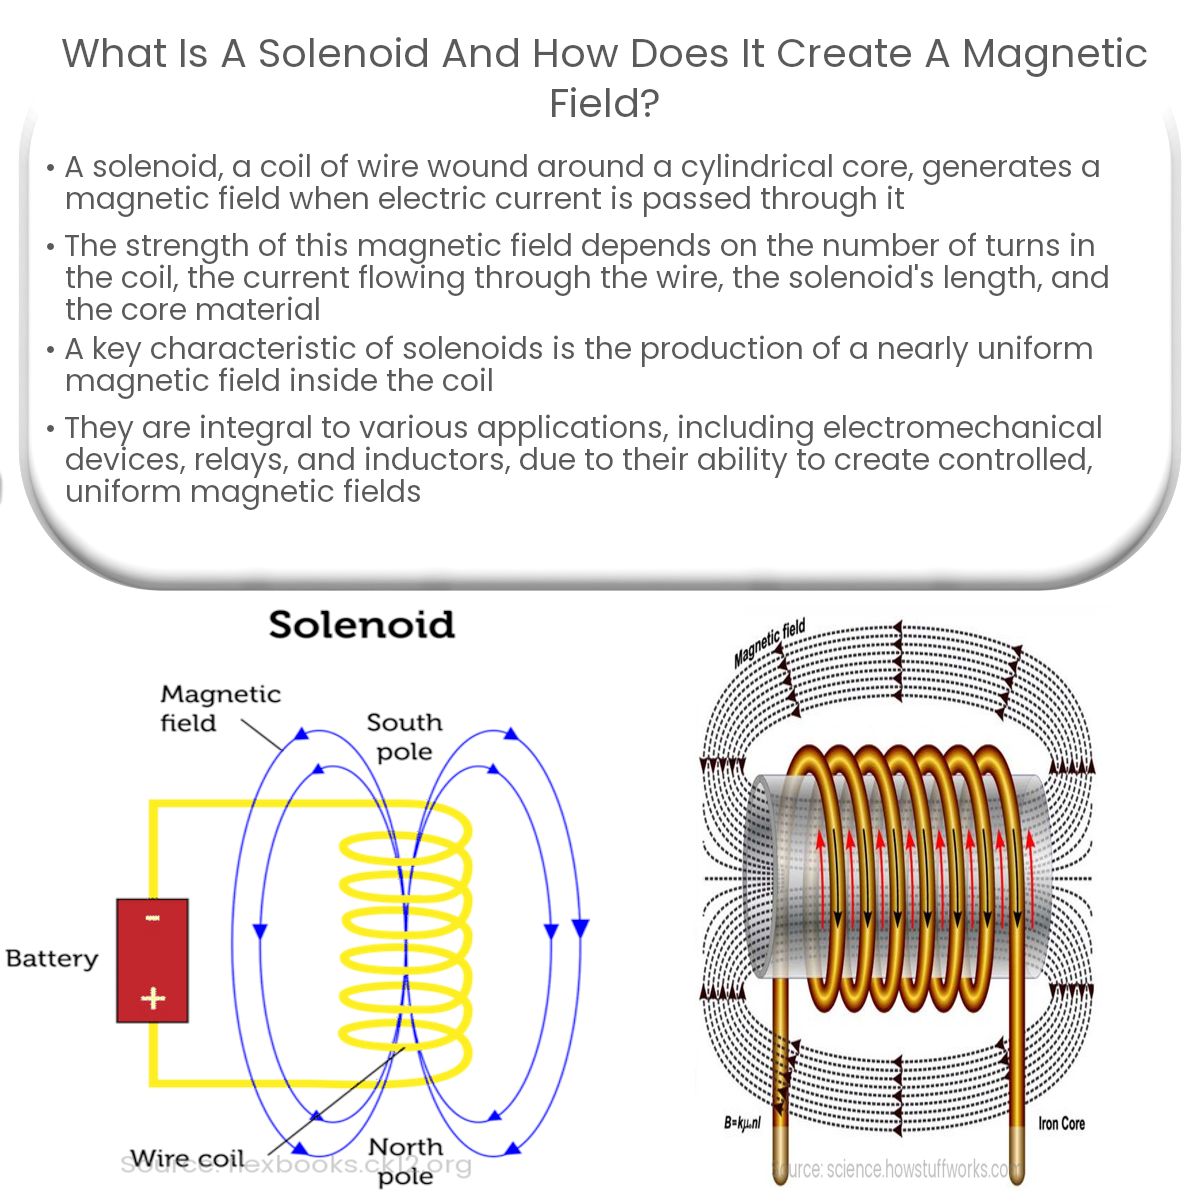 What is a solenoid and how does it create a magnetic field?